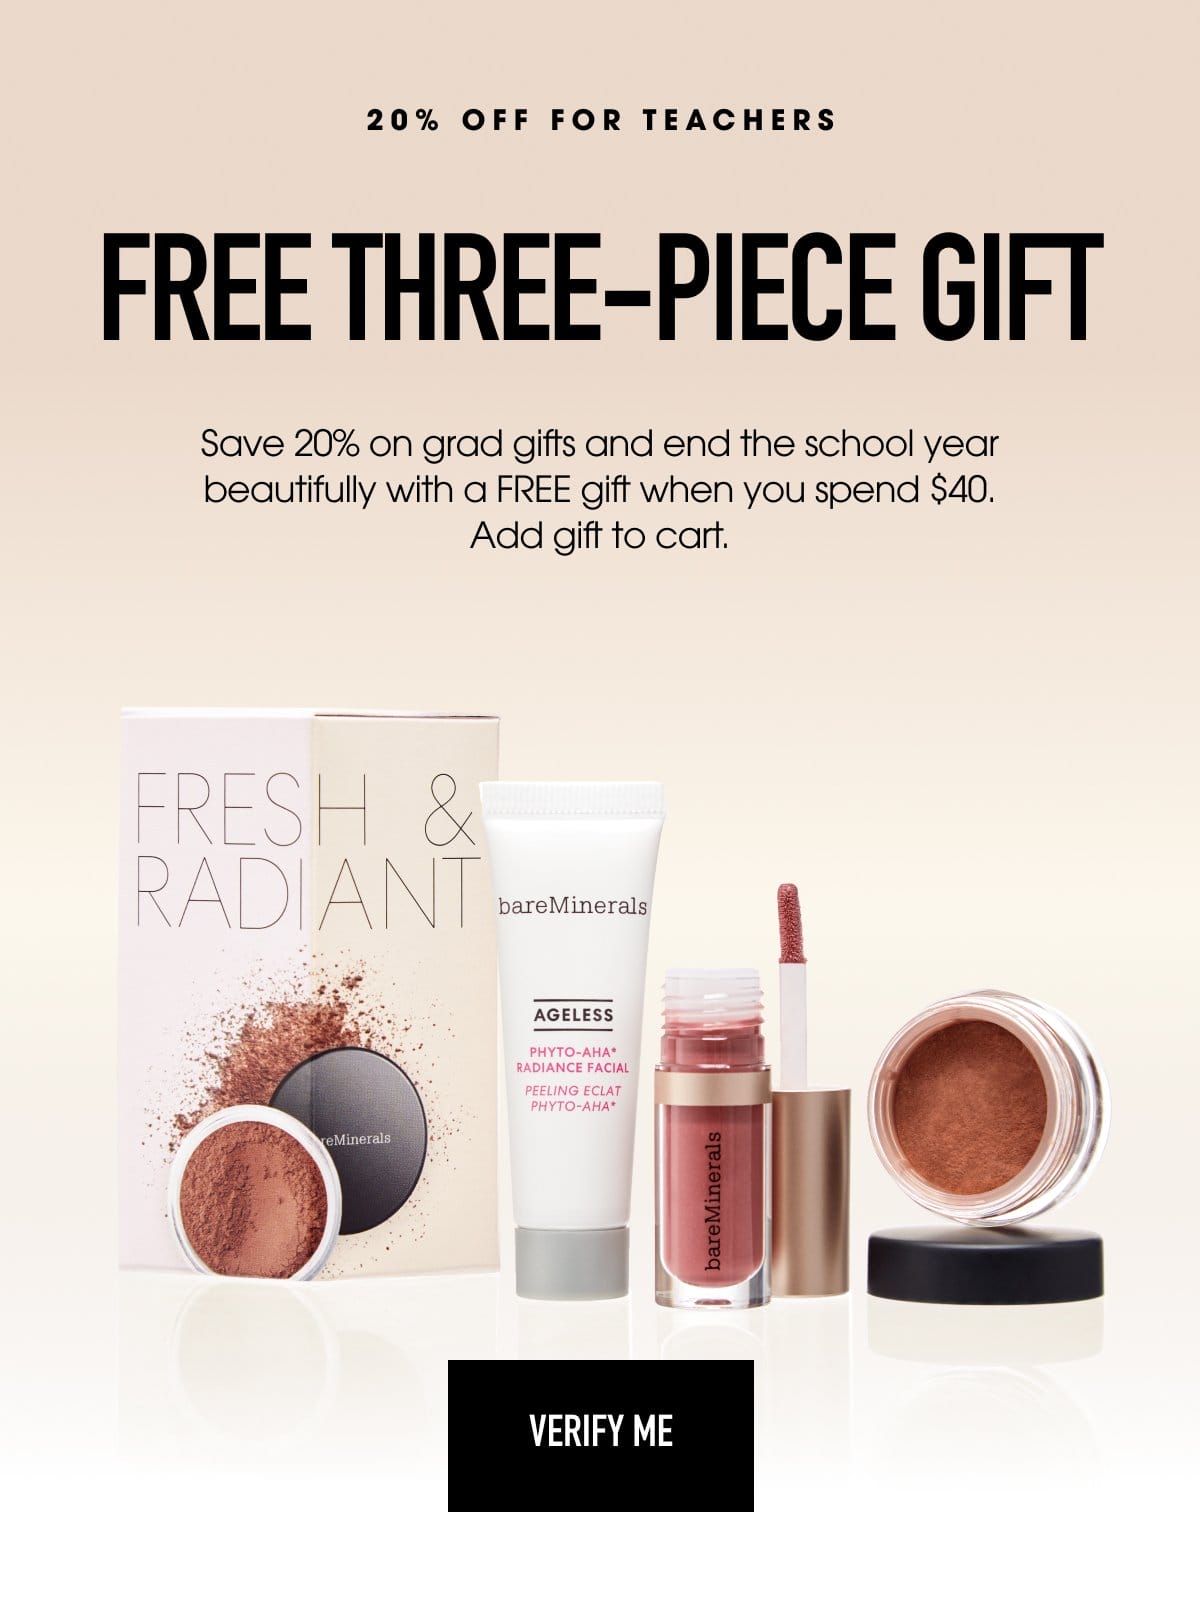 20% OFF plus a 3-Piece Gift with \\$40+ for teachers.